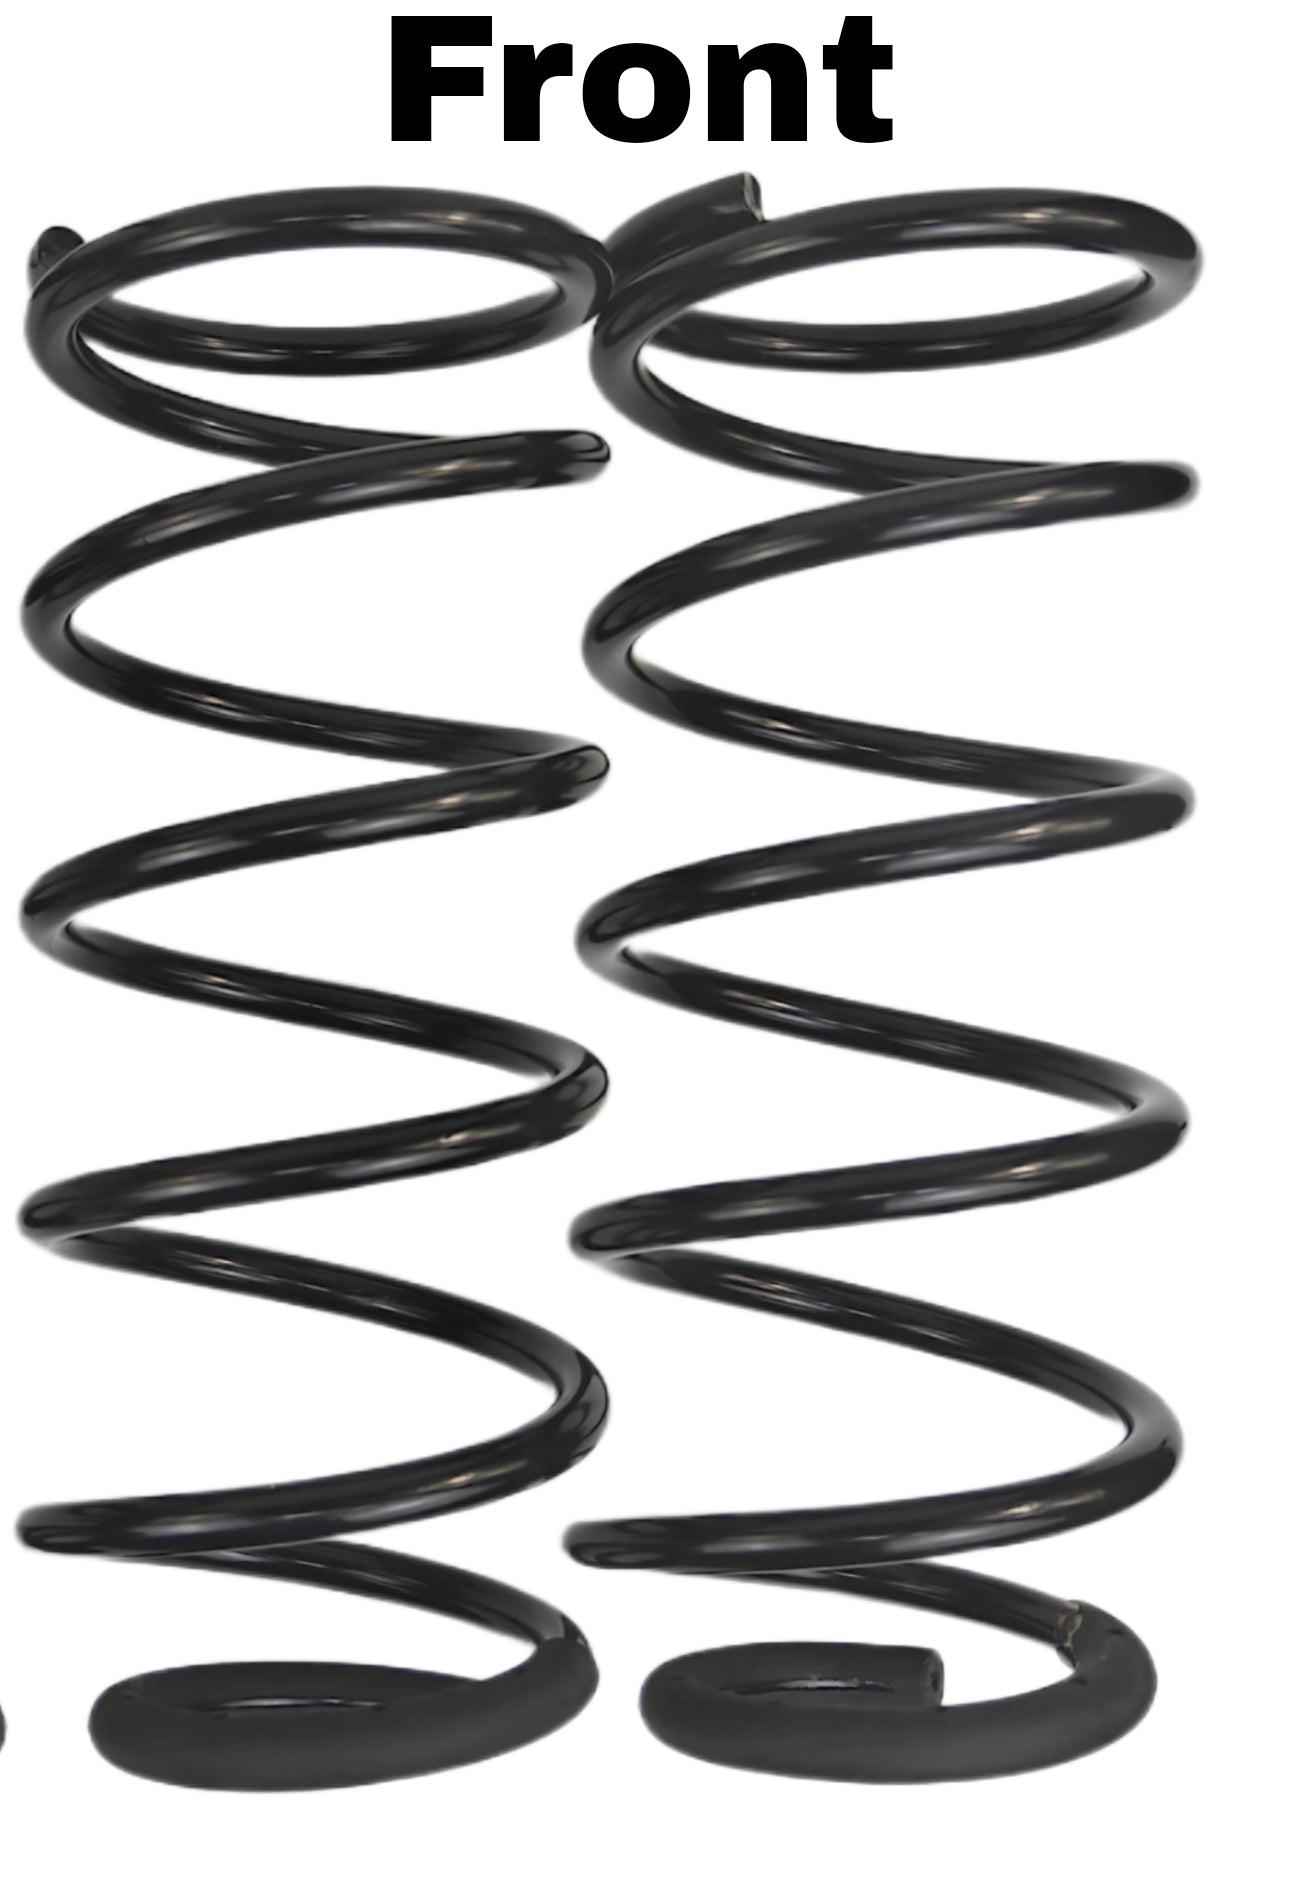 HURRICANE PERFORMANCE 2 INCH COIL SPRING SET (FRONT & REAR) FOR NISSAN Y61 - 2 DOOR